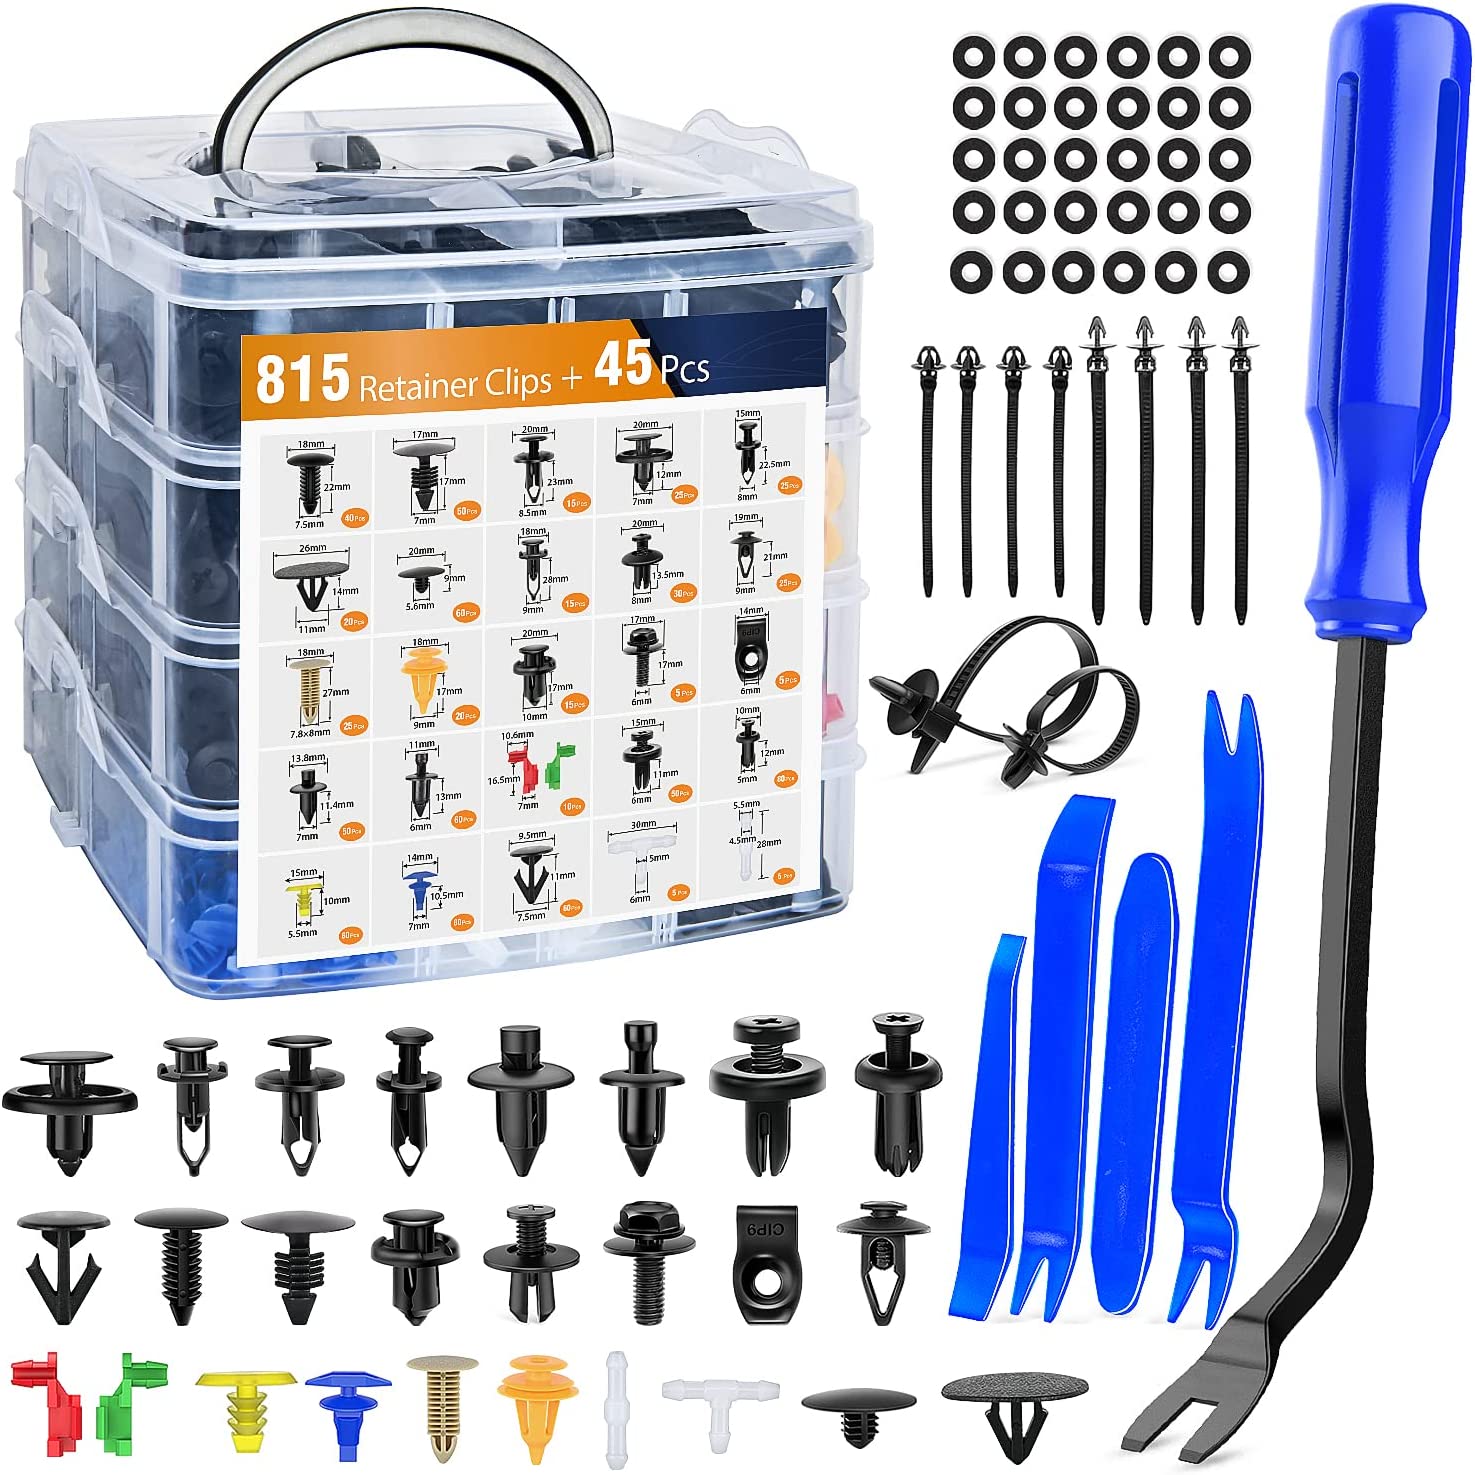 240 Pcs Car Push Retainer Kit and Free Fastener Remover,Assortment  Universal Bumper Retainer Clips Push Type Retainers Set in Case Fits For GM  Ford